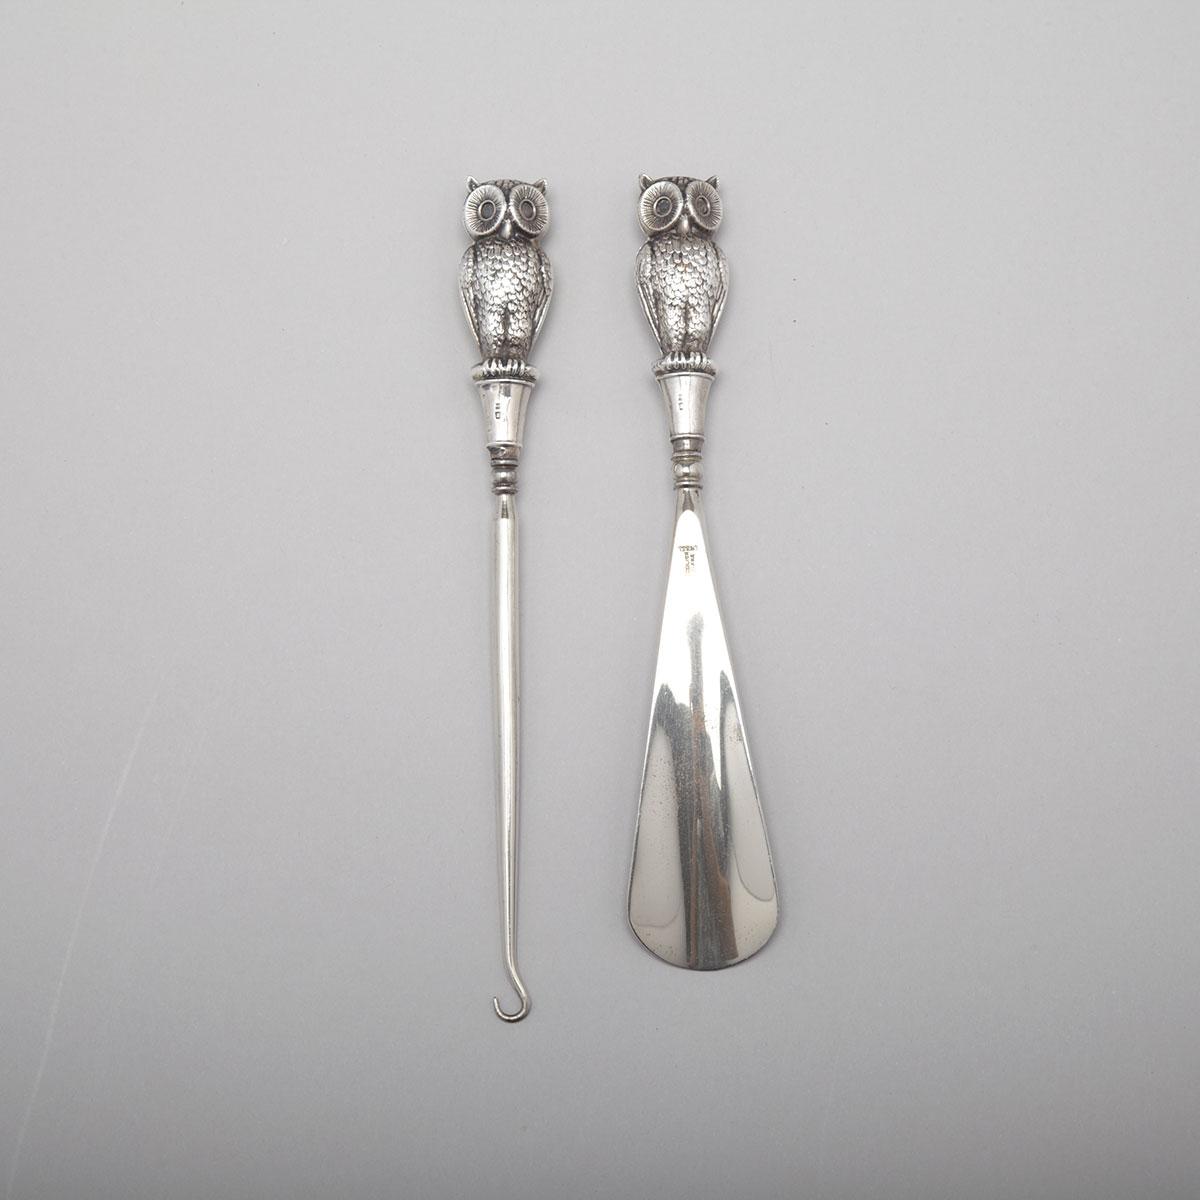 English Silver Owl Handled Shoe Horn and Button Hook, Crisford & Norris. Birmingham, 1910